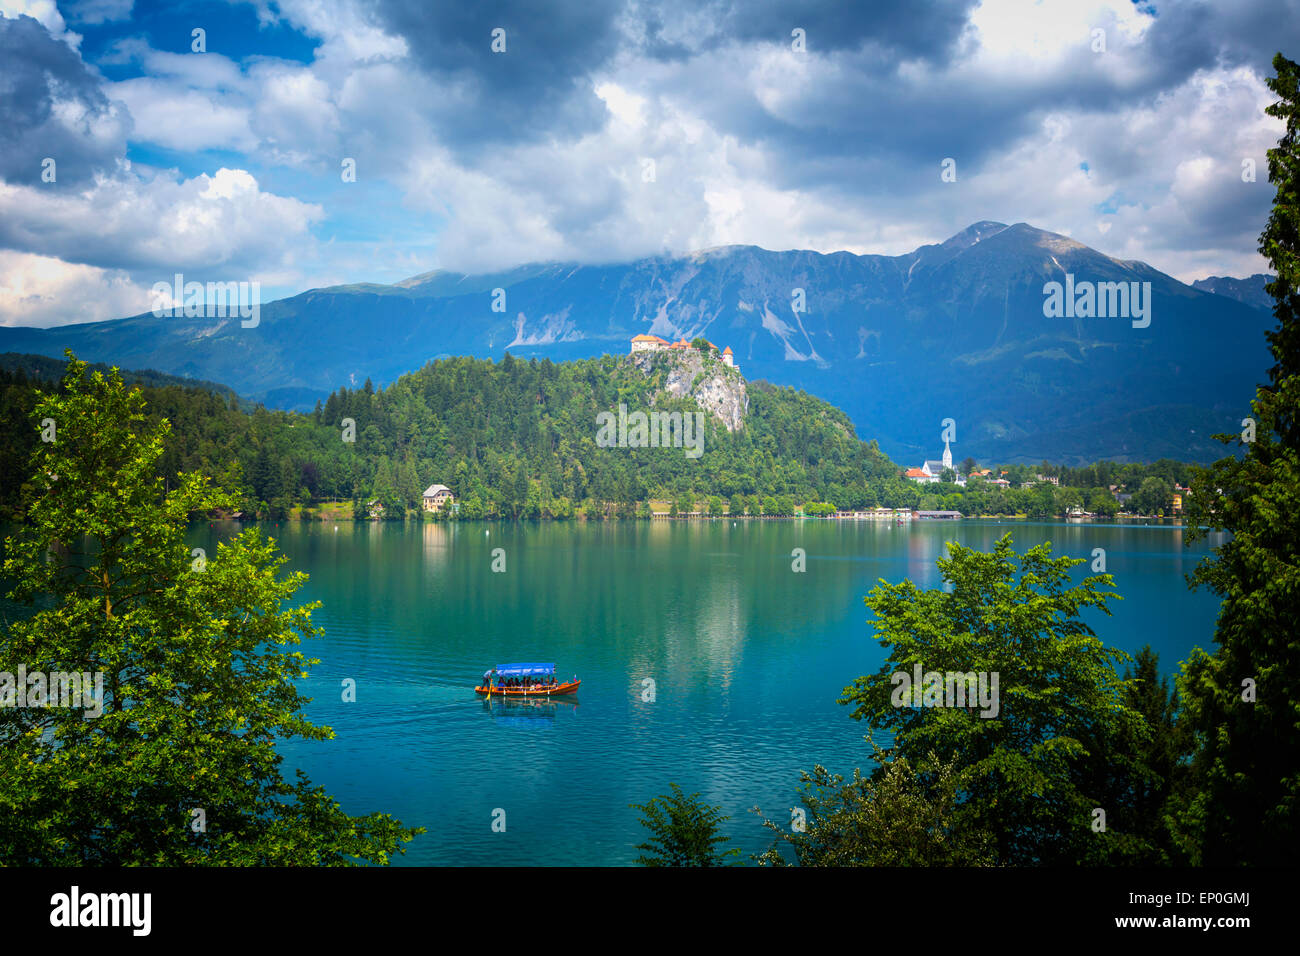 Lake Bled, Upper Carniola, Slovenia.  Bled Castle seen across the lake.  The town of Bled in the background. Stock Photo